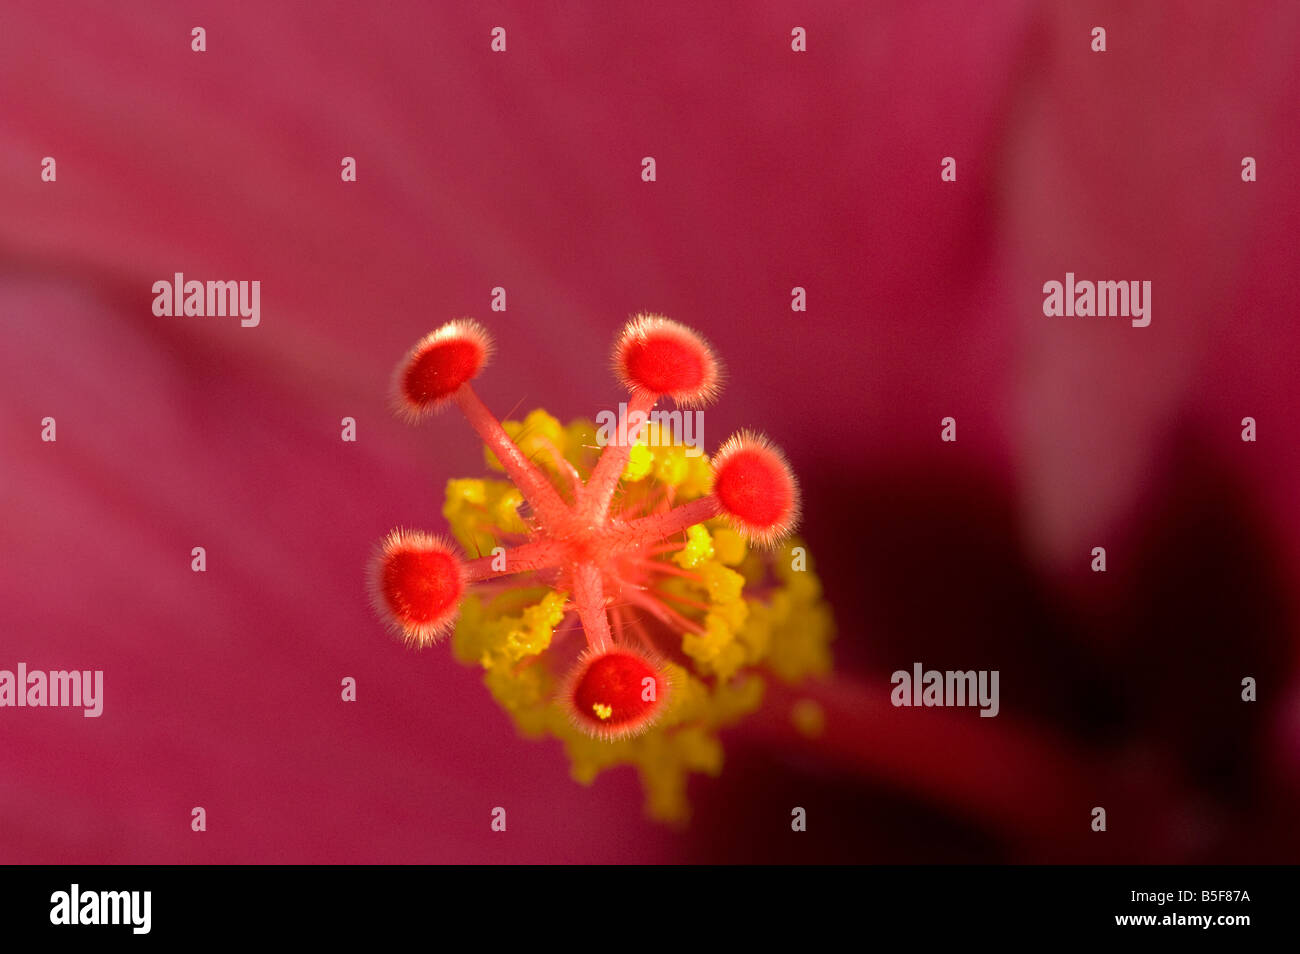 Detail of hibiscus flower showing 5 part stigma surrounded by pollen laiden stamens lit by fibre optics Stock Photo